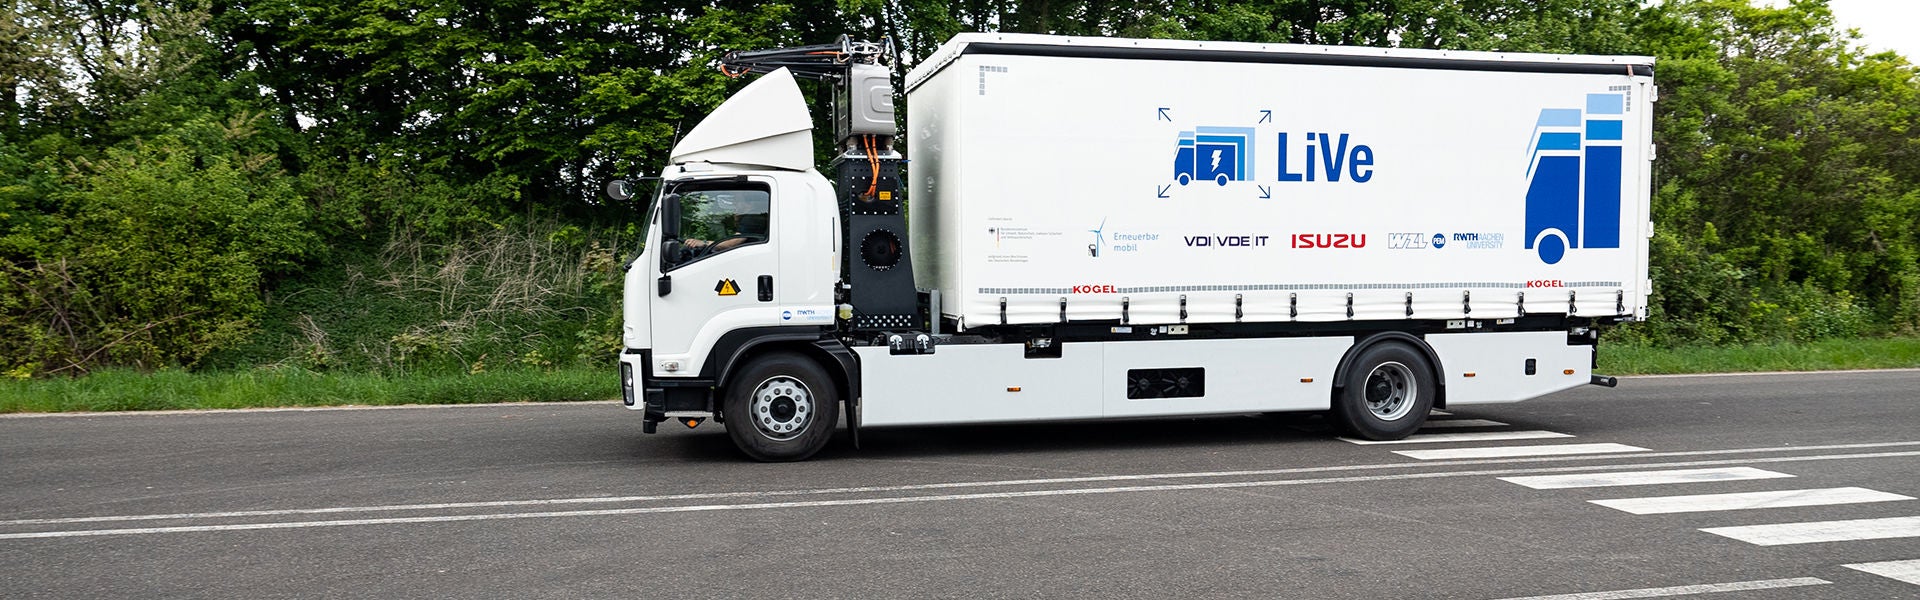 RWTH Aachen Truck with Pantograph and Webasto Components